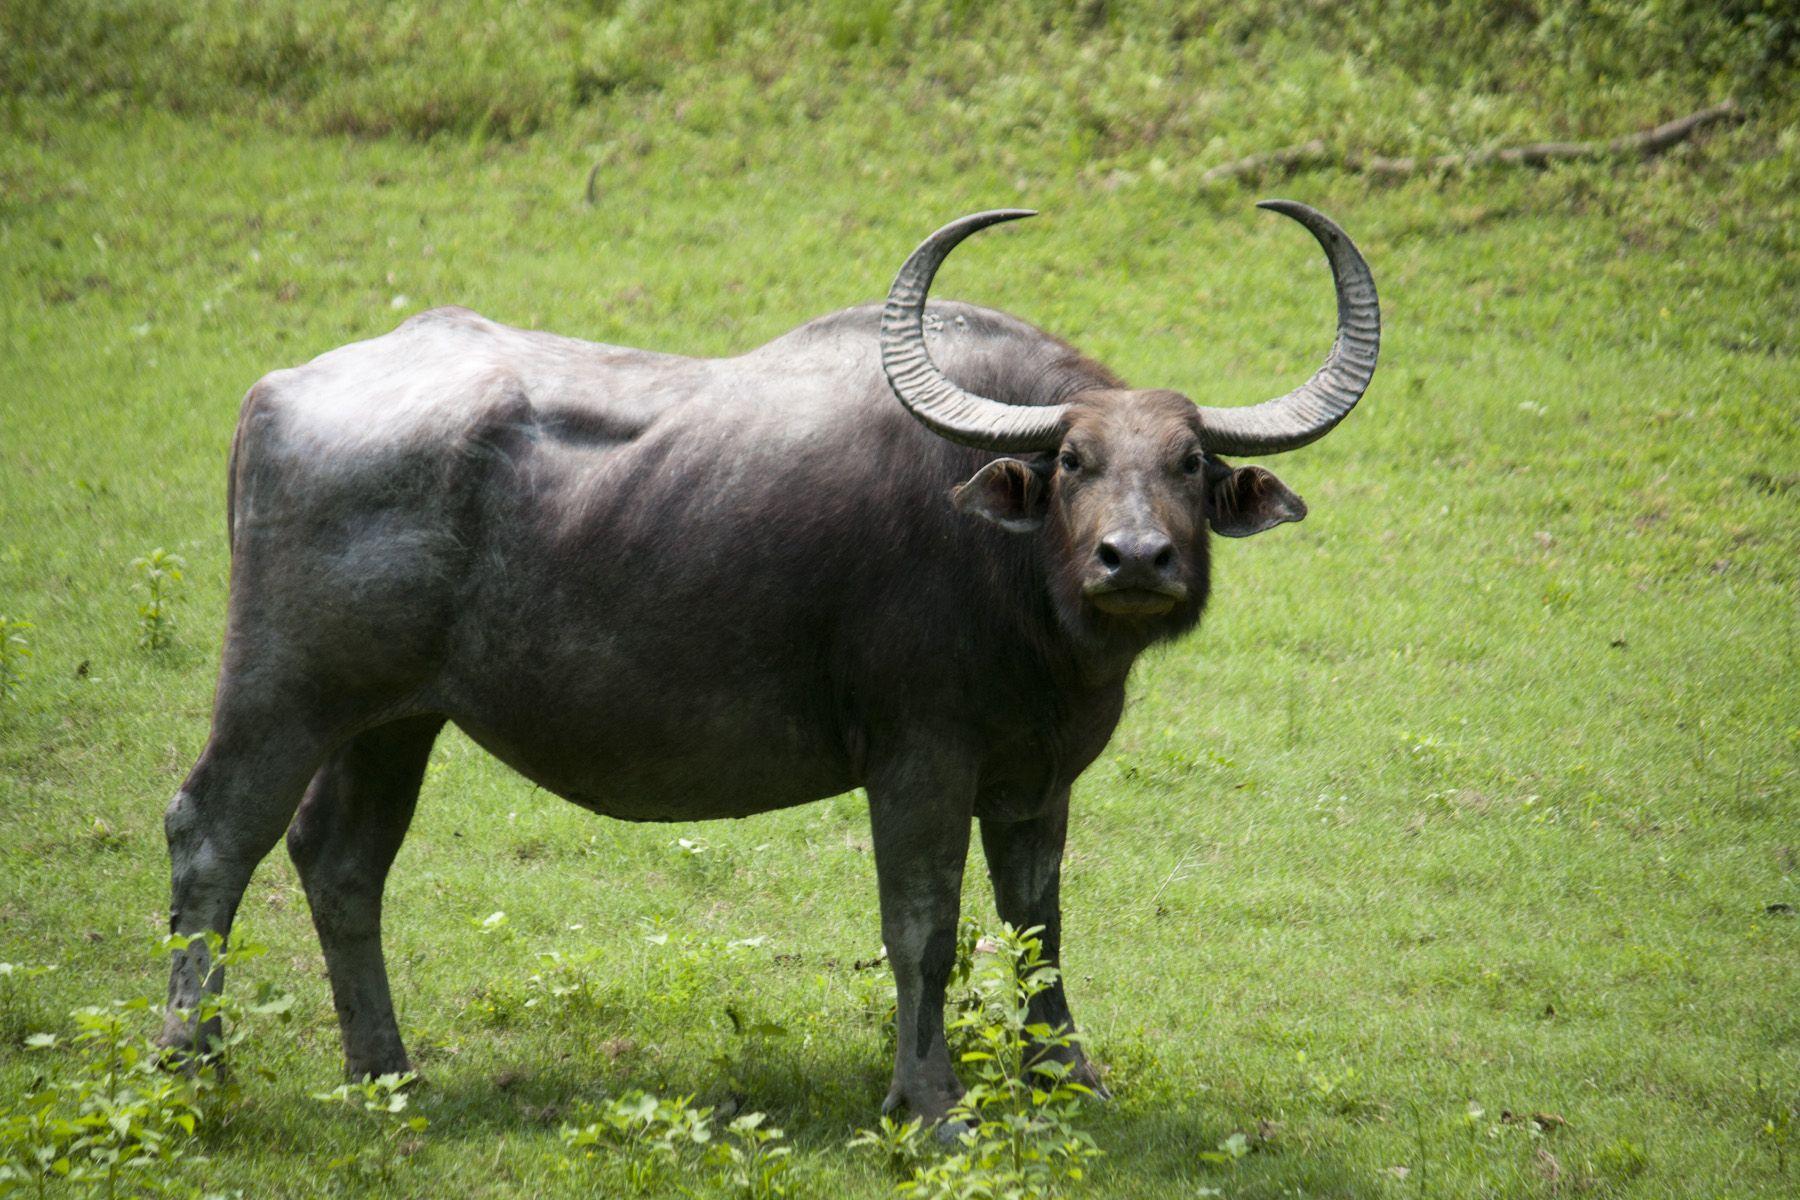 Short study and facts about Wild buffalo. animals